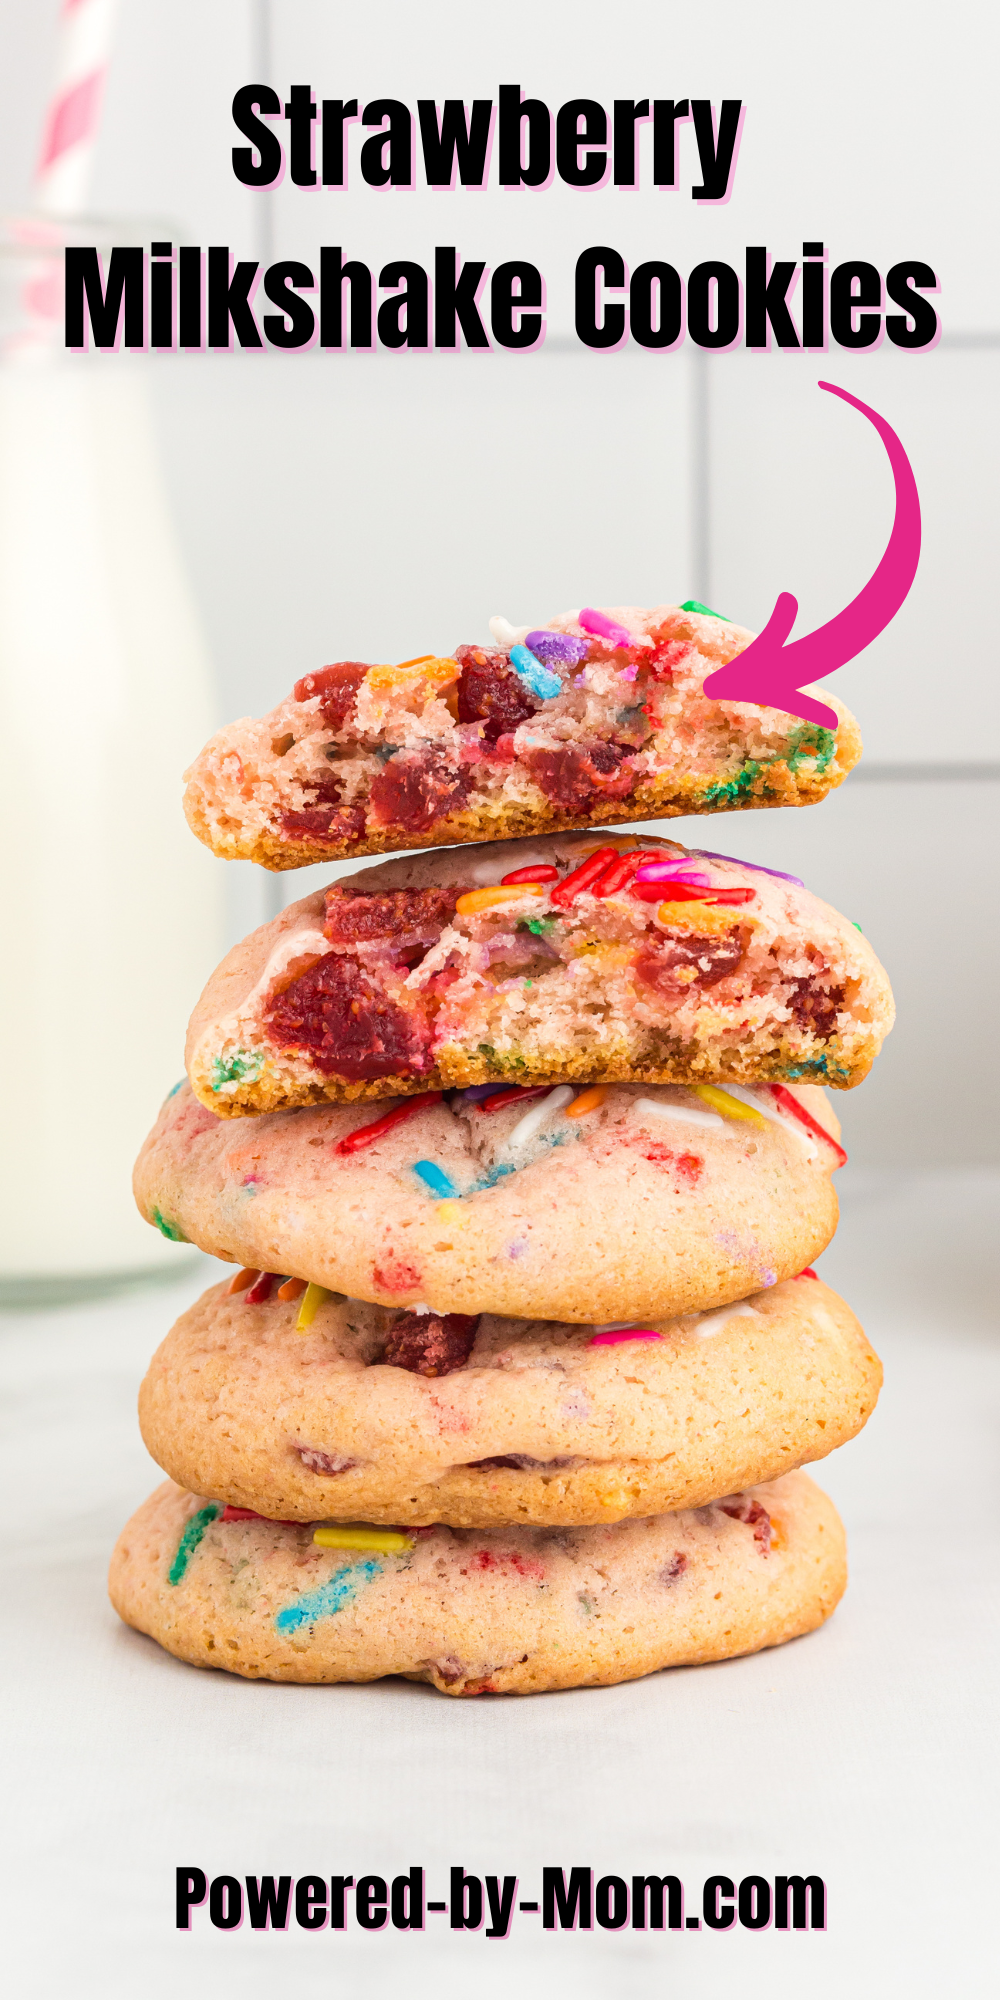 If you love unique cookie recipes you will enjoy this yummy Strawberry Milkshake Cookies Recipe. Delicious strawberry flavours from the dehydrated strawberries, strawberry ice cream (we did say milkshake cookies) and strawberry jell-o! It's like the taste of summer in a cookie. Get the recipe now.